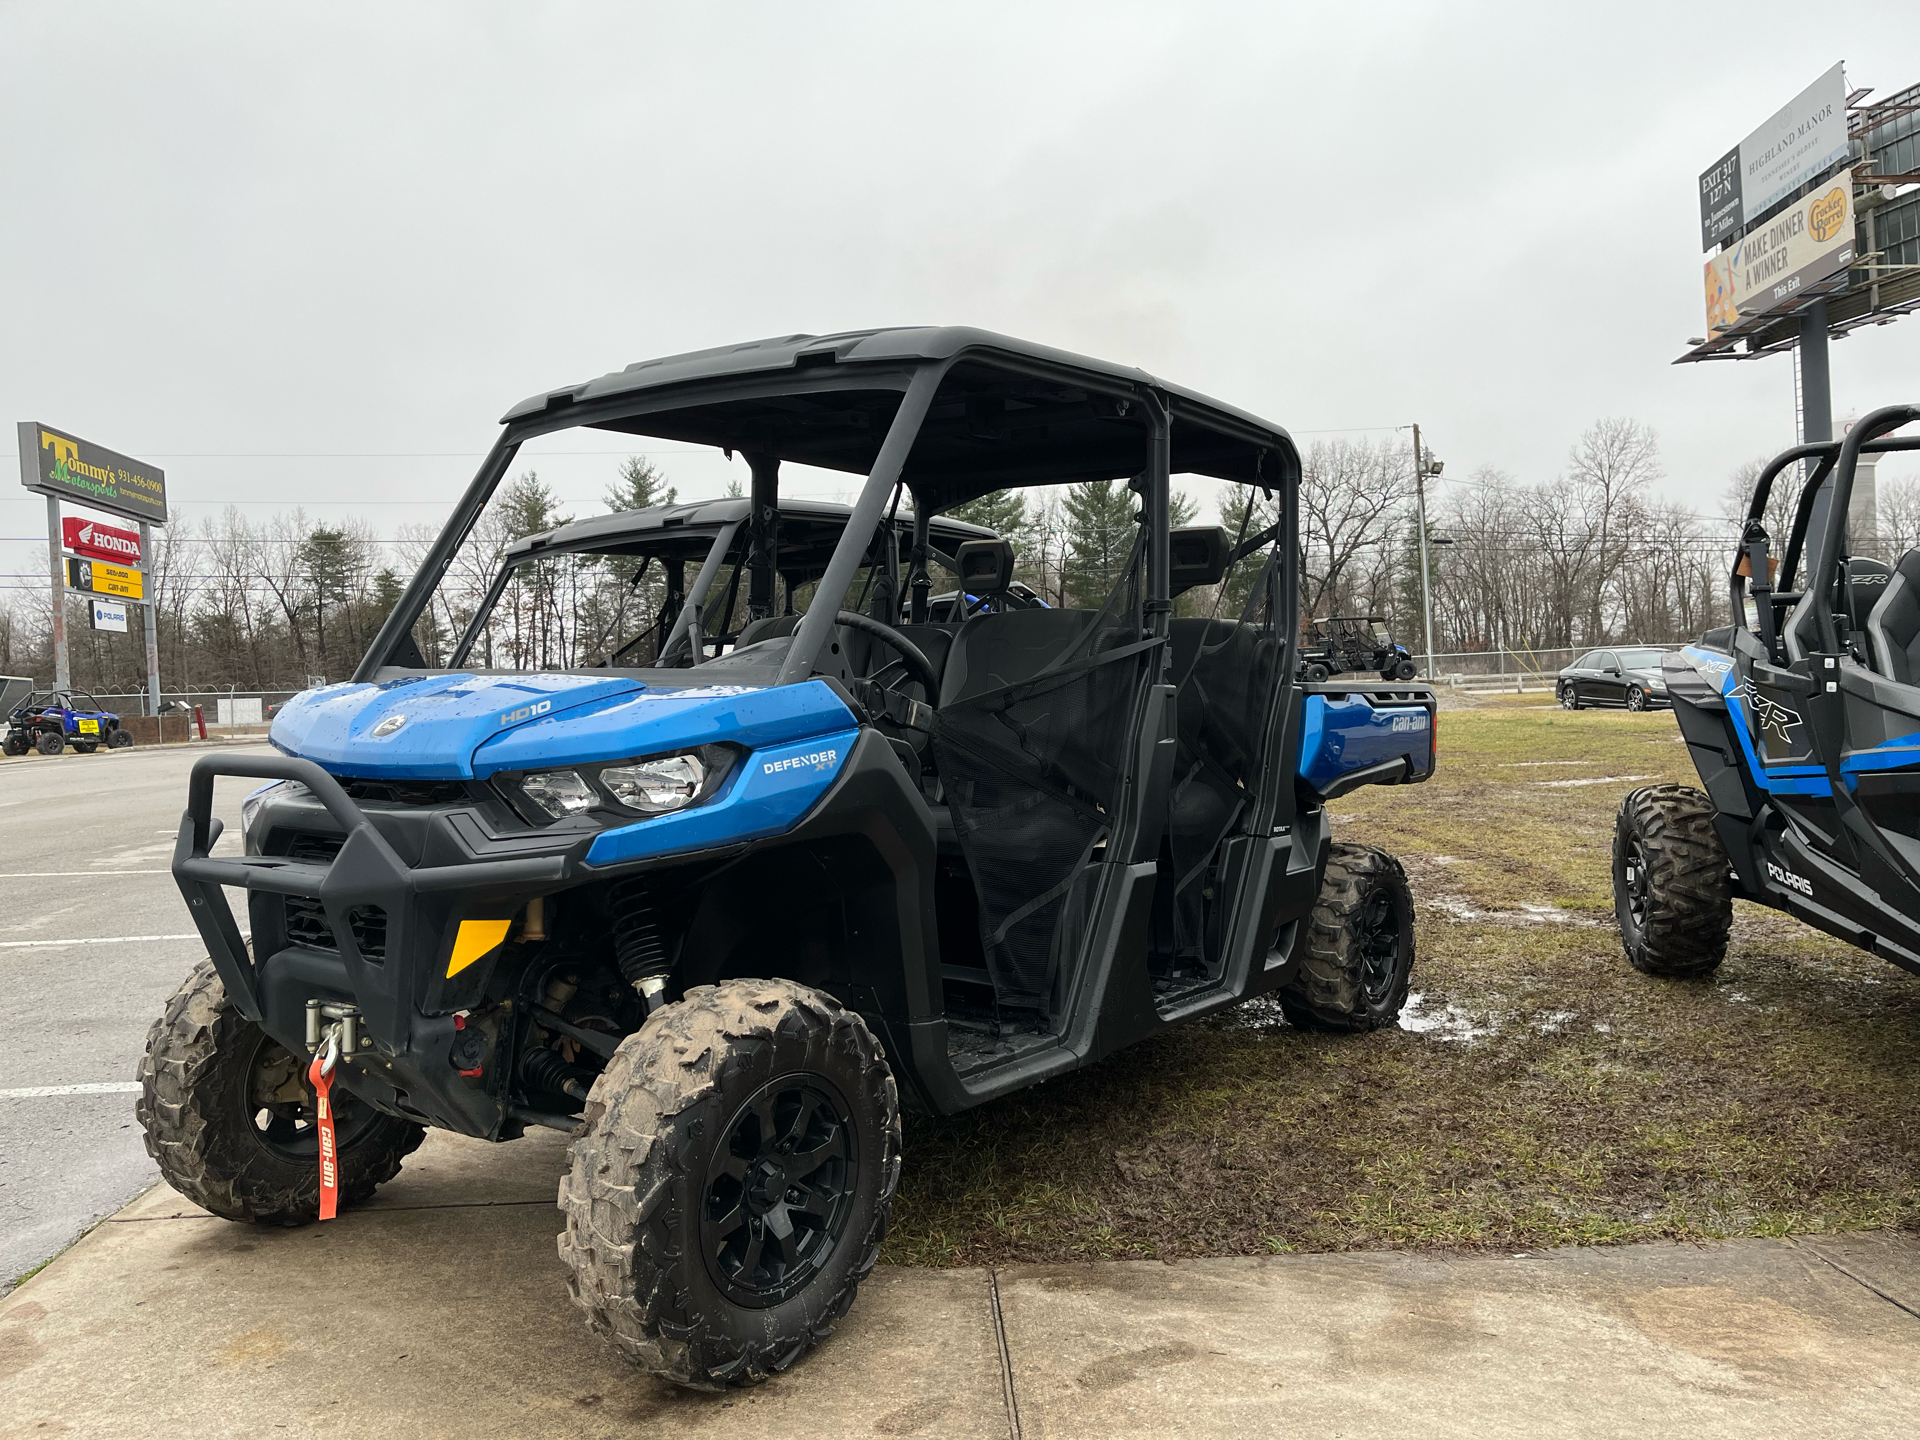 2022 Can-Am Defender MAX XT HD10 in Crossville, Tennessee - Photo 1